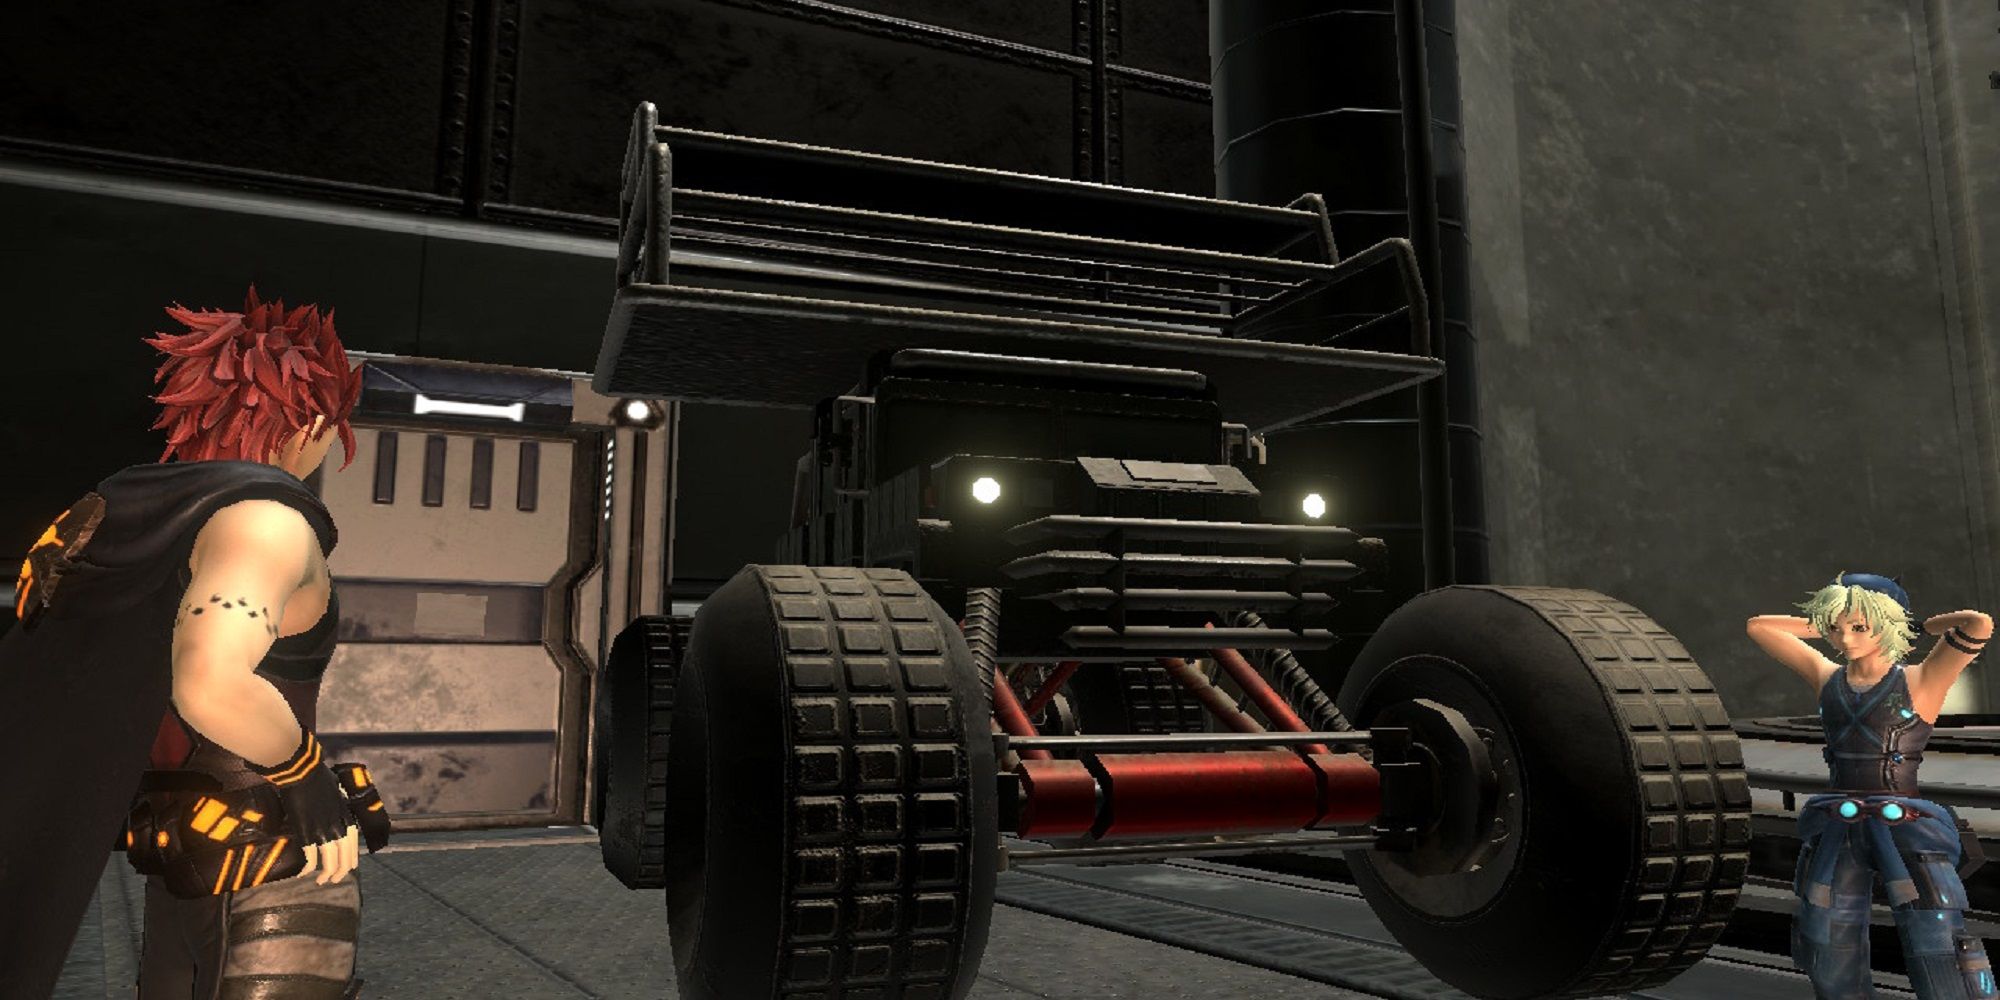 Yokky shows off the Monster Buggy he restored to Talis at Iron Base in Metal Max Xeno Reborn.